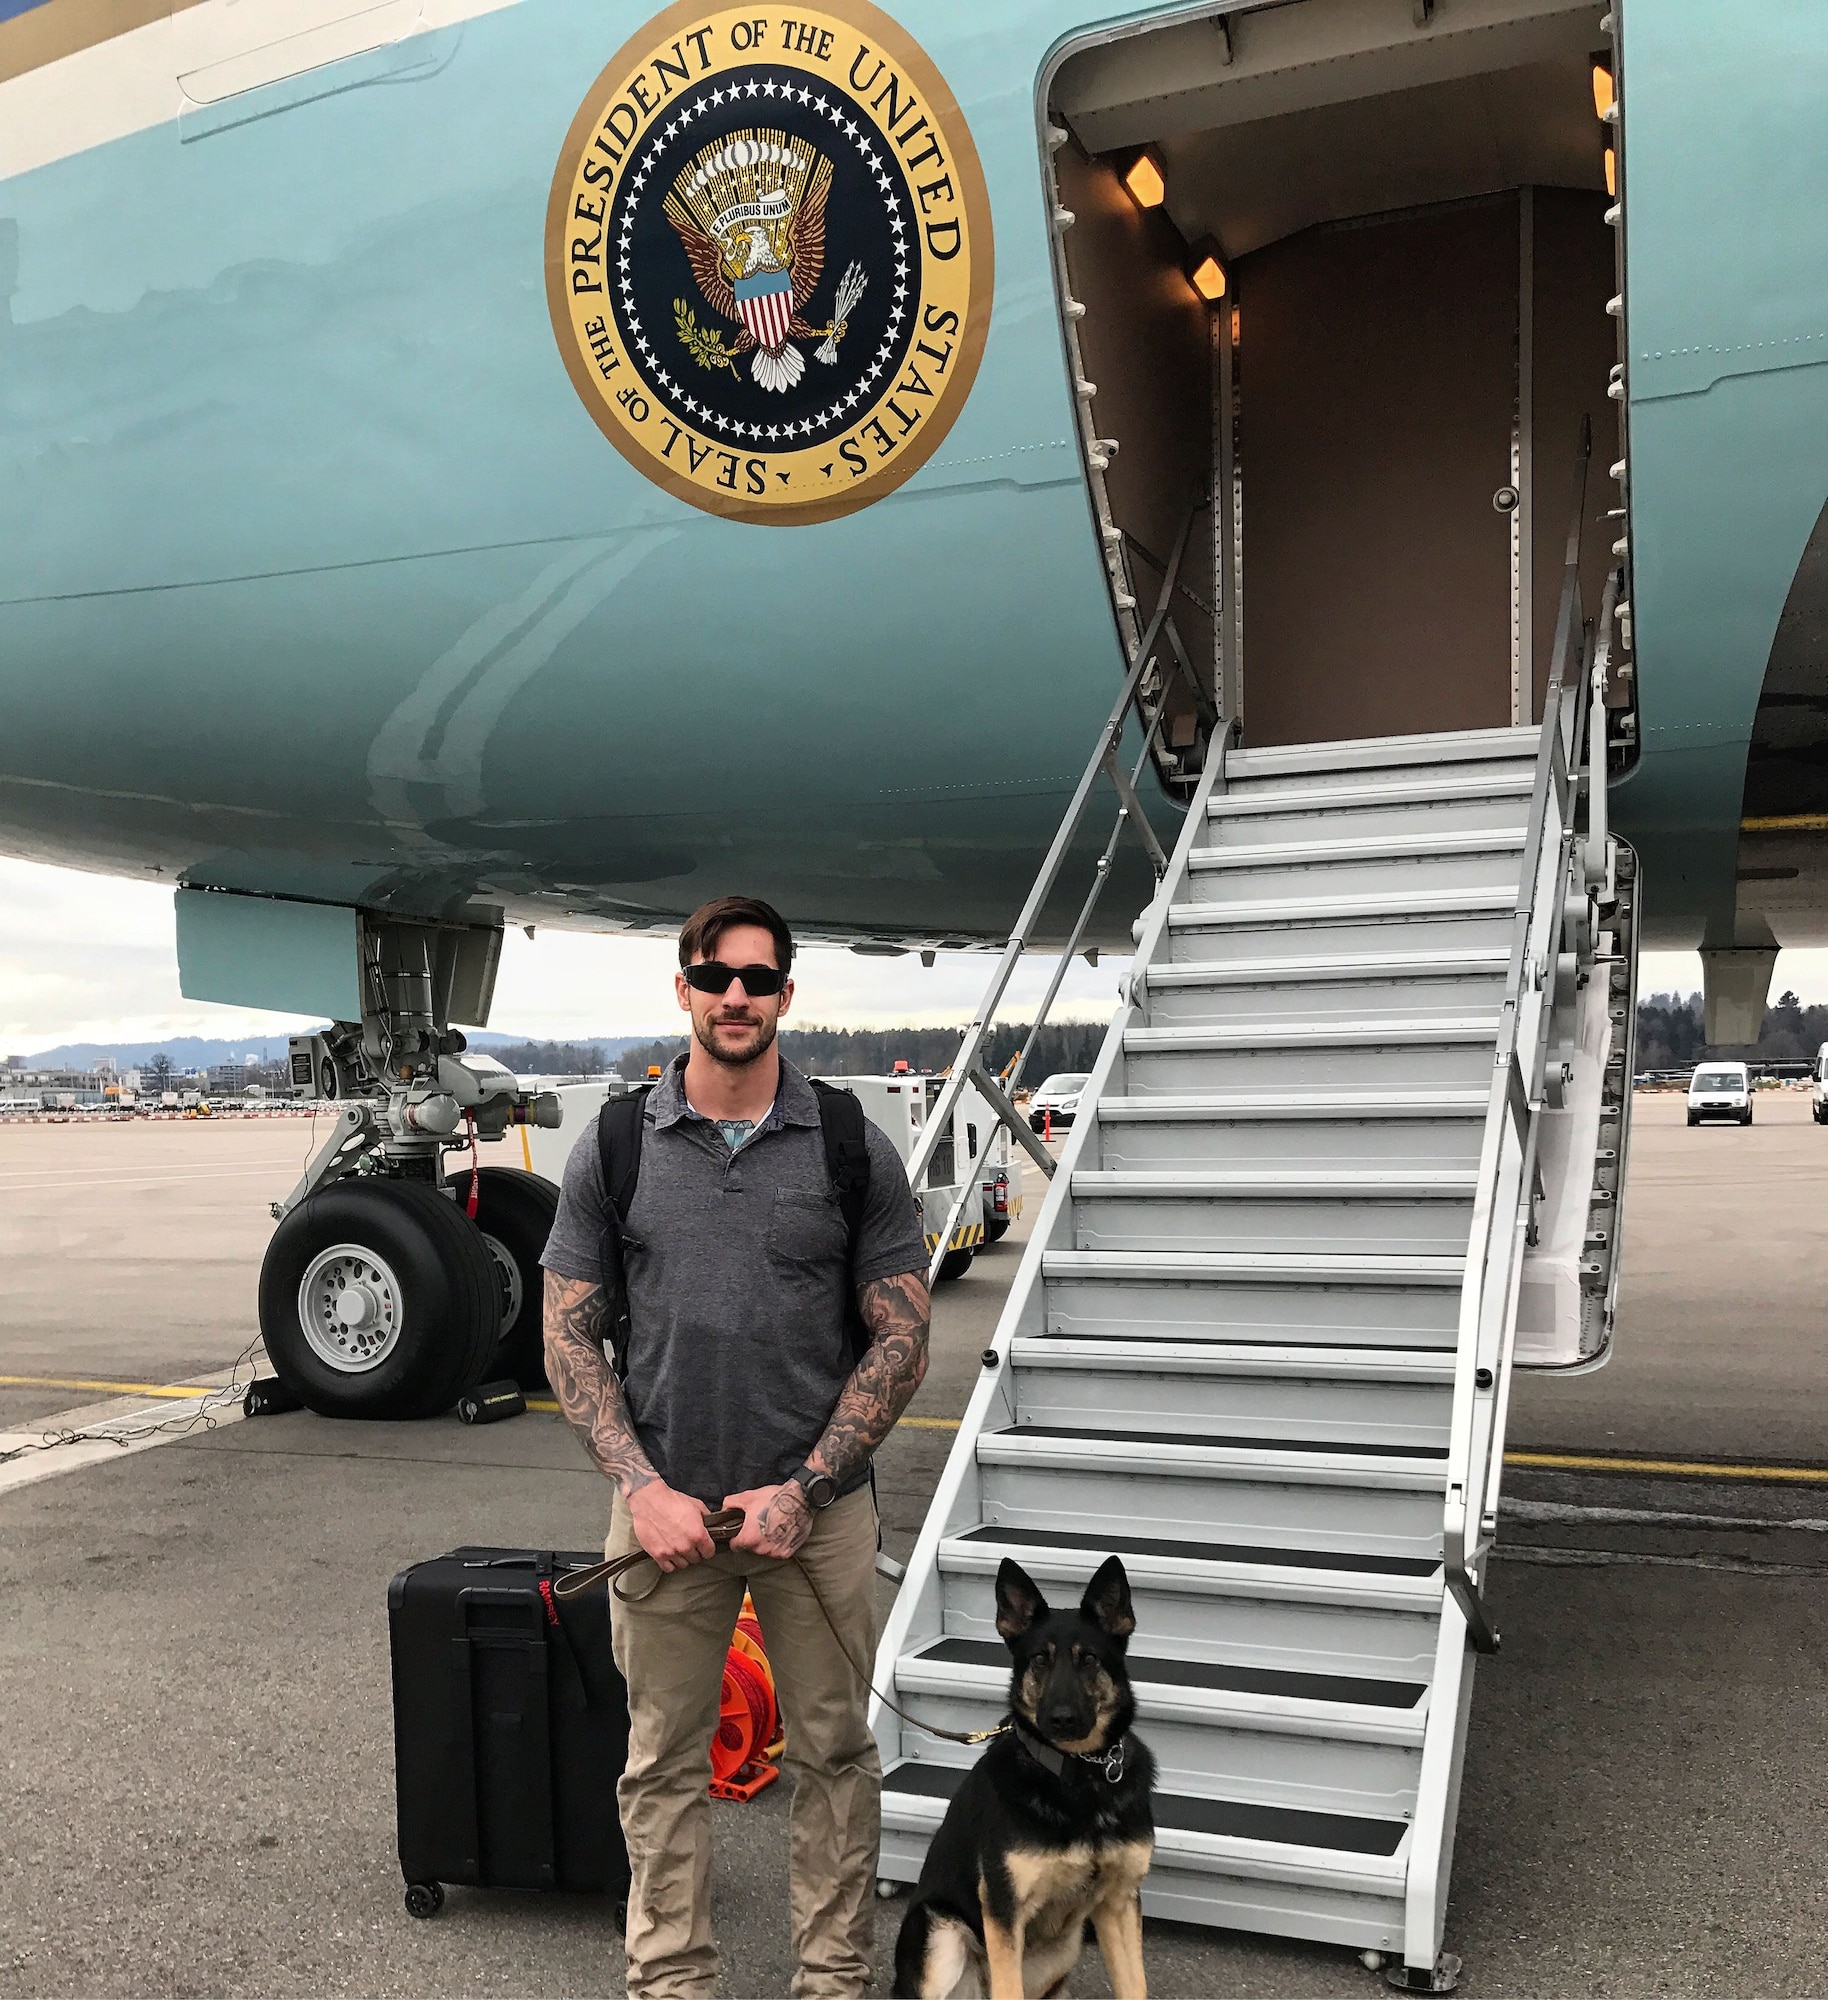 Air Force Staff Sgt. Michael Hensley, 52nd Security Forces Squadron military working dog handler, and Tina, 52nd SFS MWD, stand outside Air Force One Jan. 26, 2018. Two MWD teams were part of the security detail for President Donald J. Trump’s visit to Davos, Switzerland for the World Economic Forum, where they worked alongside Secret Service dog teams.